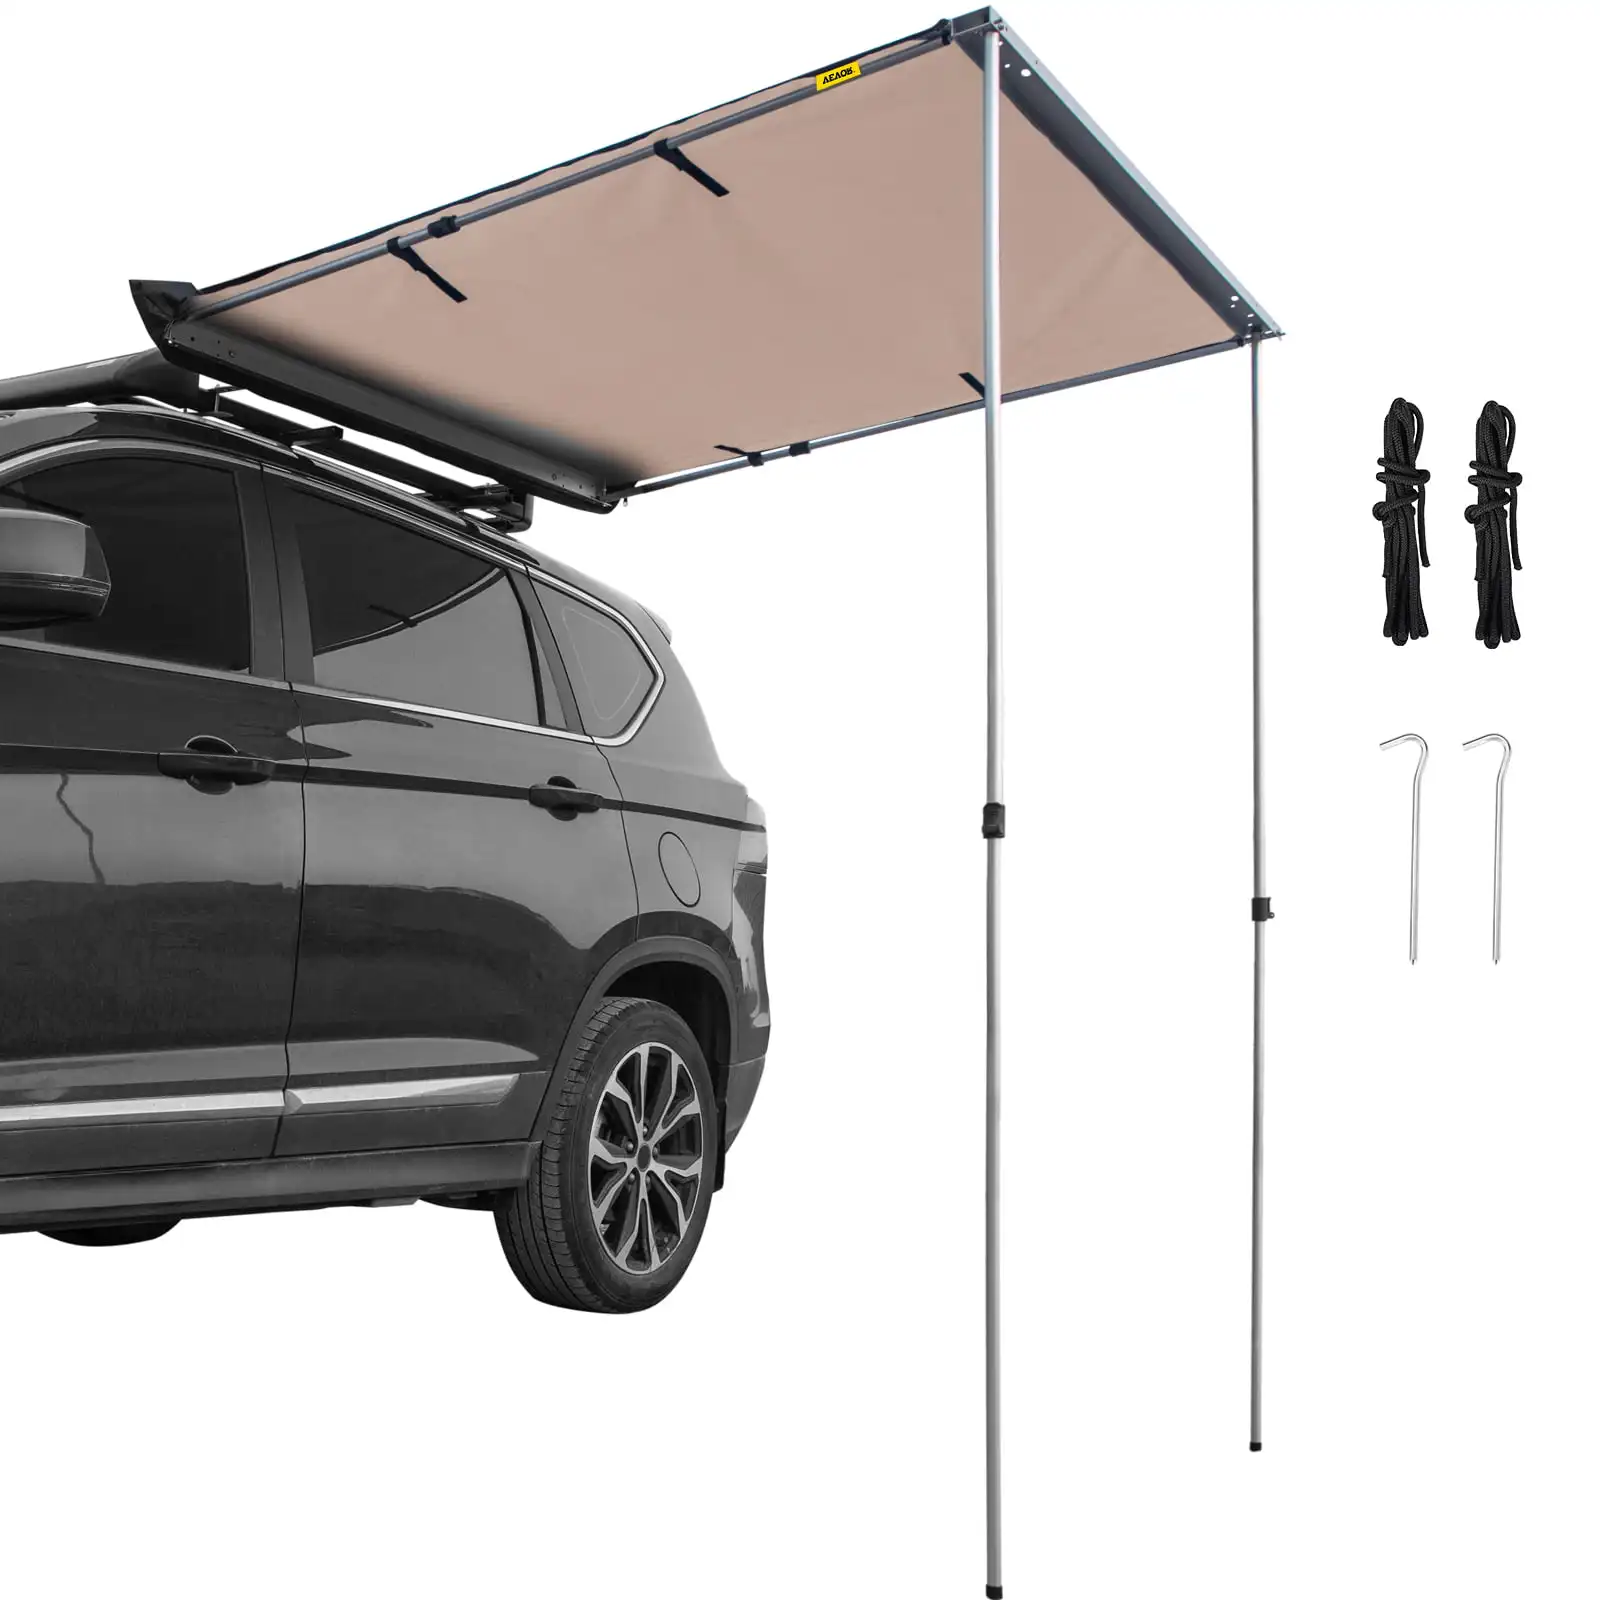 "Khaki 5'x6.5' Pull-Out Retractable Vehicle Awning - Waterproof UV50+ Car Side Awning with Telescoping Poles